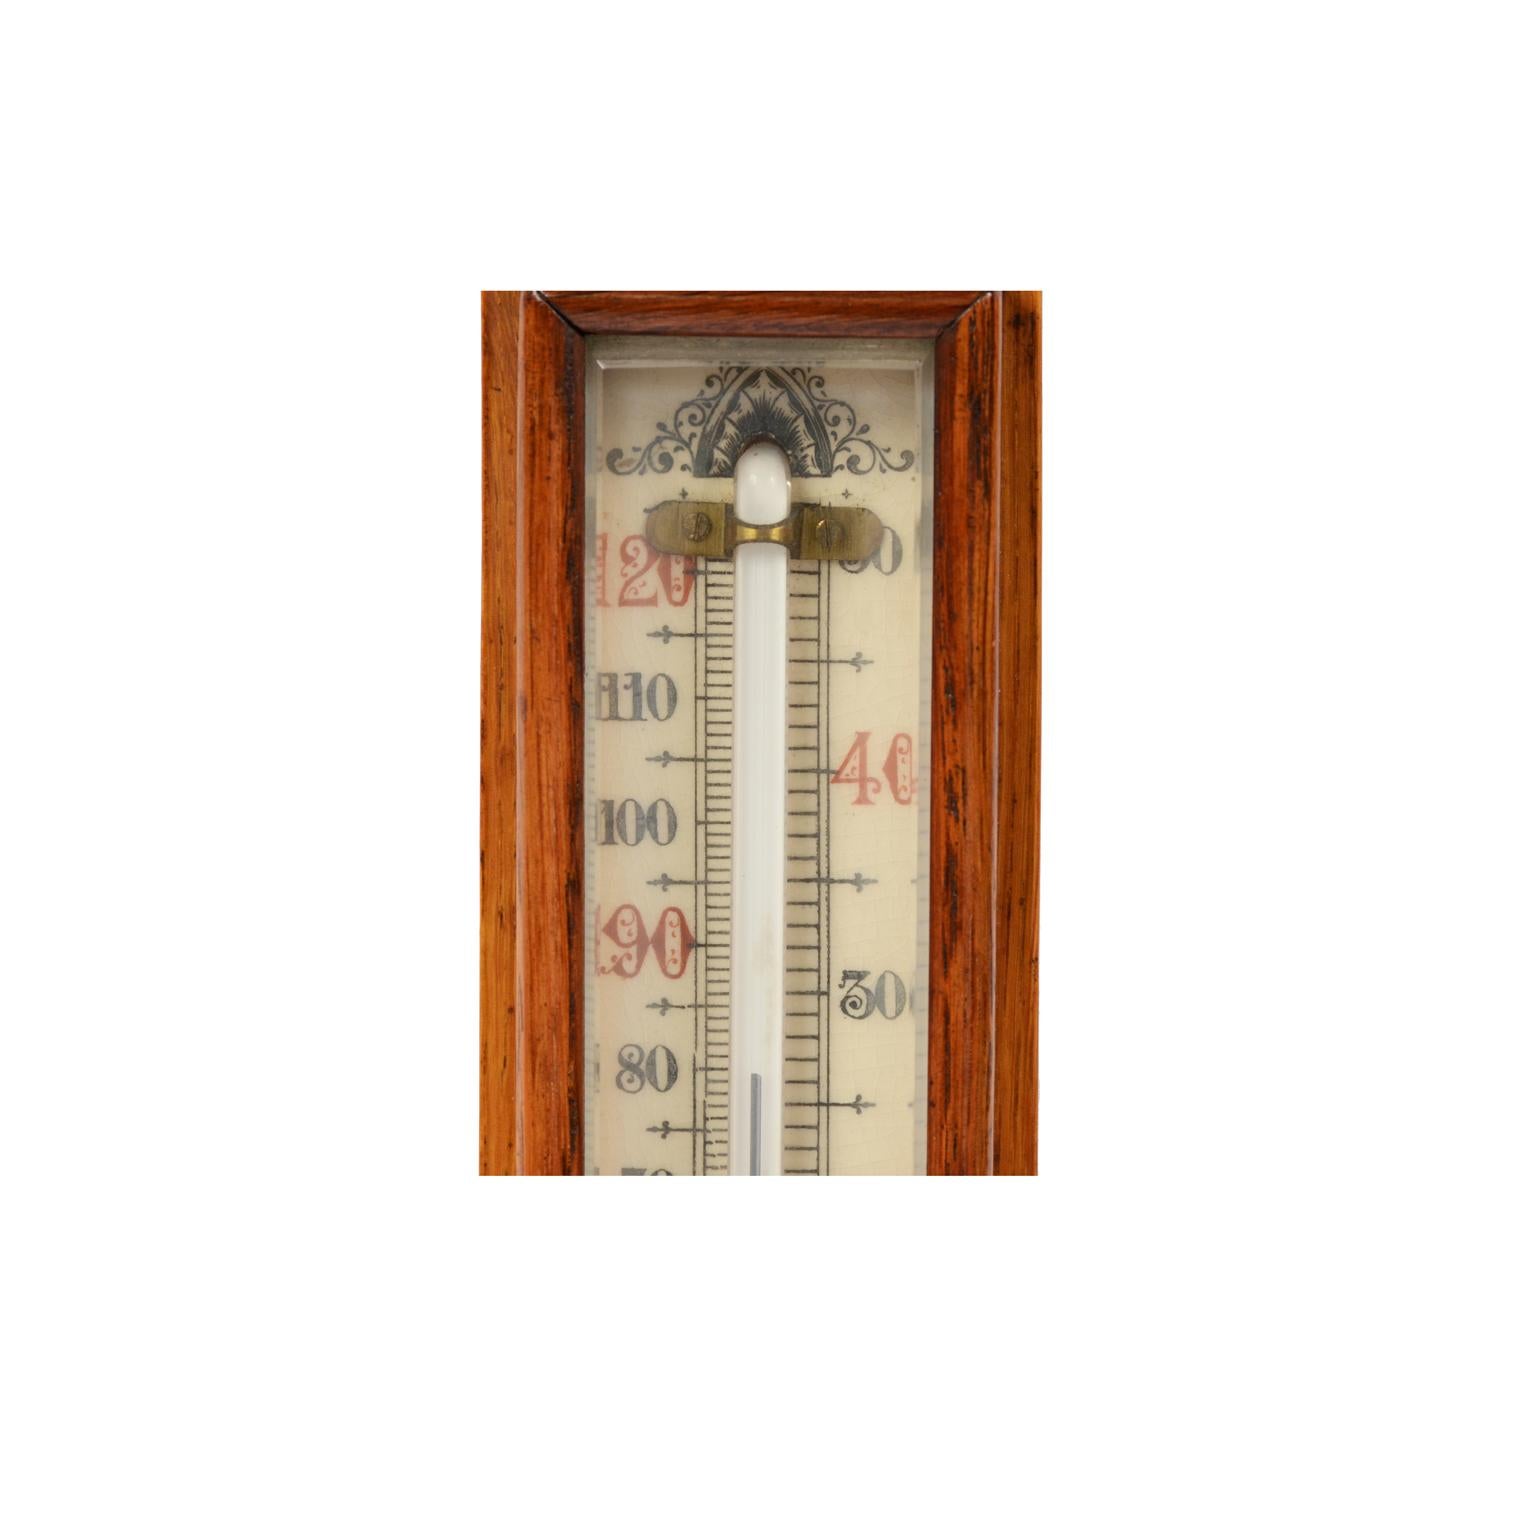 Late 19th Century J. H. Stewar Barometer and Thermometer Antique Weather Misure For Sale 4